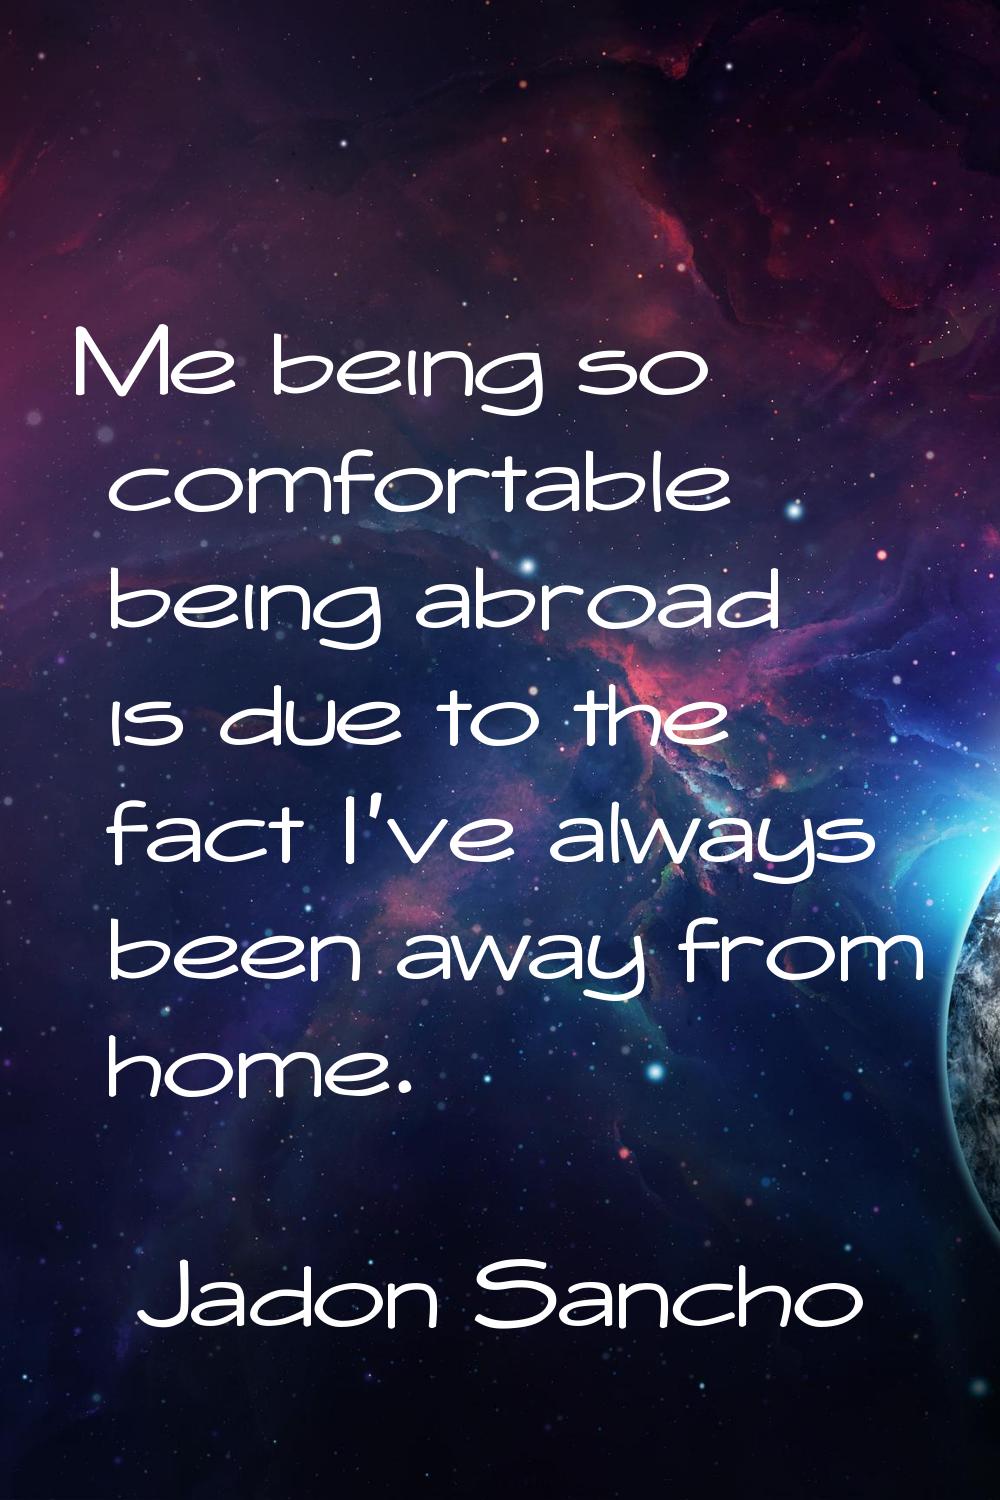 Me being so comfortable being abroad is due to the fact I've always been away from home.